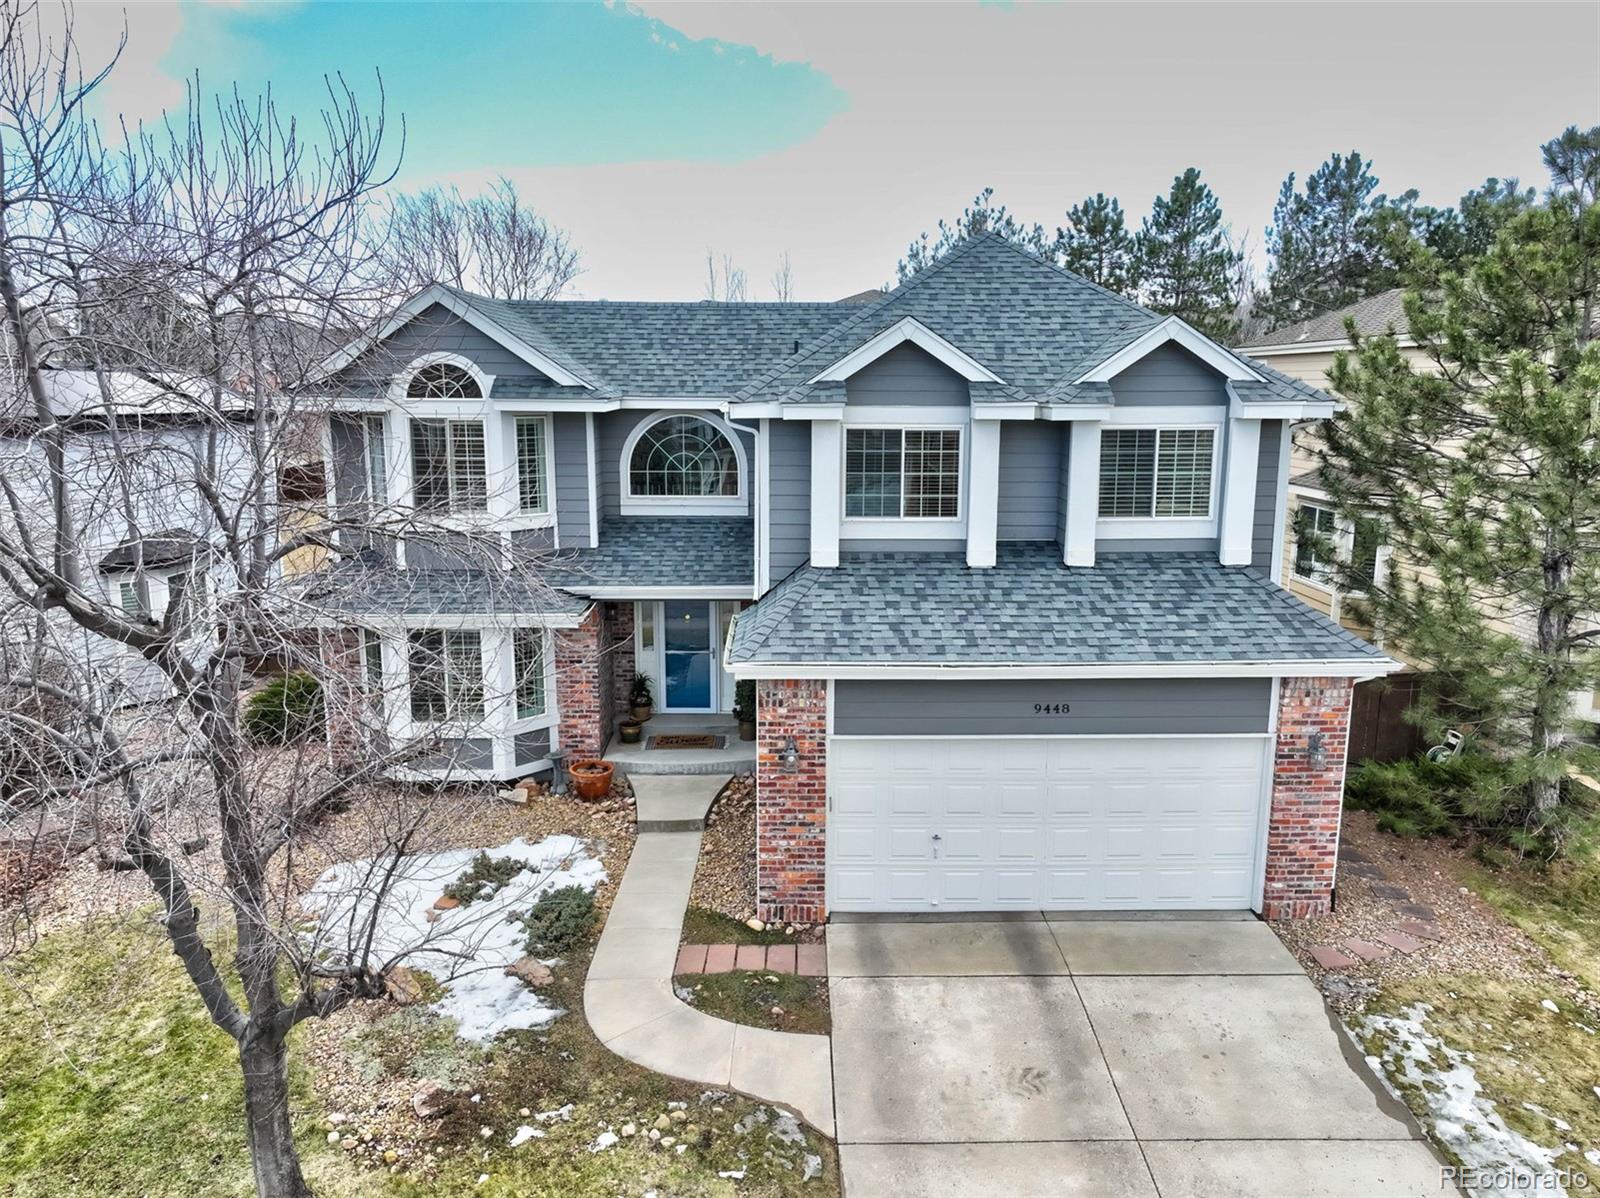 9448  cherryvale lane, Highlands Ranch sold home. Closed on 2024-04-26 for $845,000.